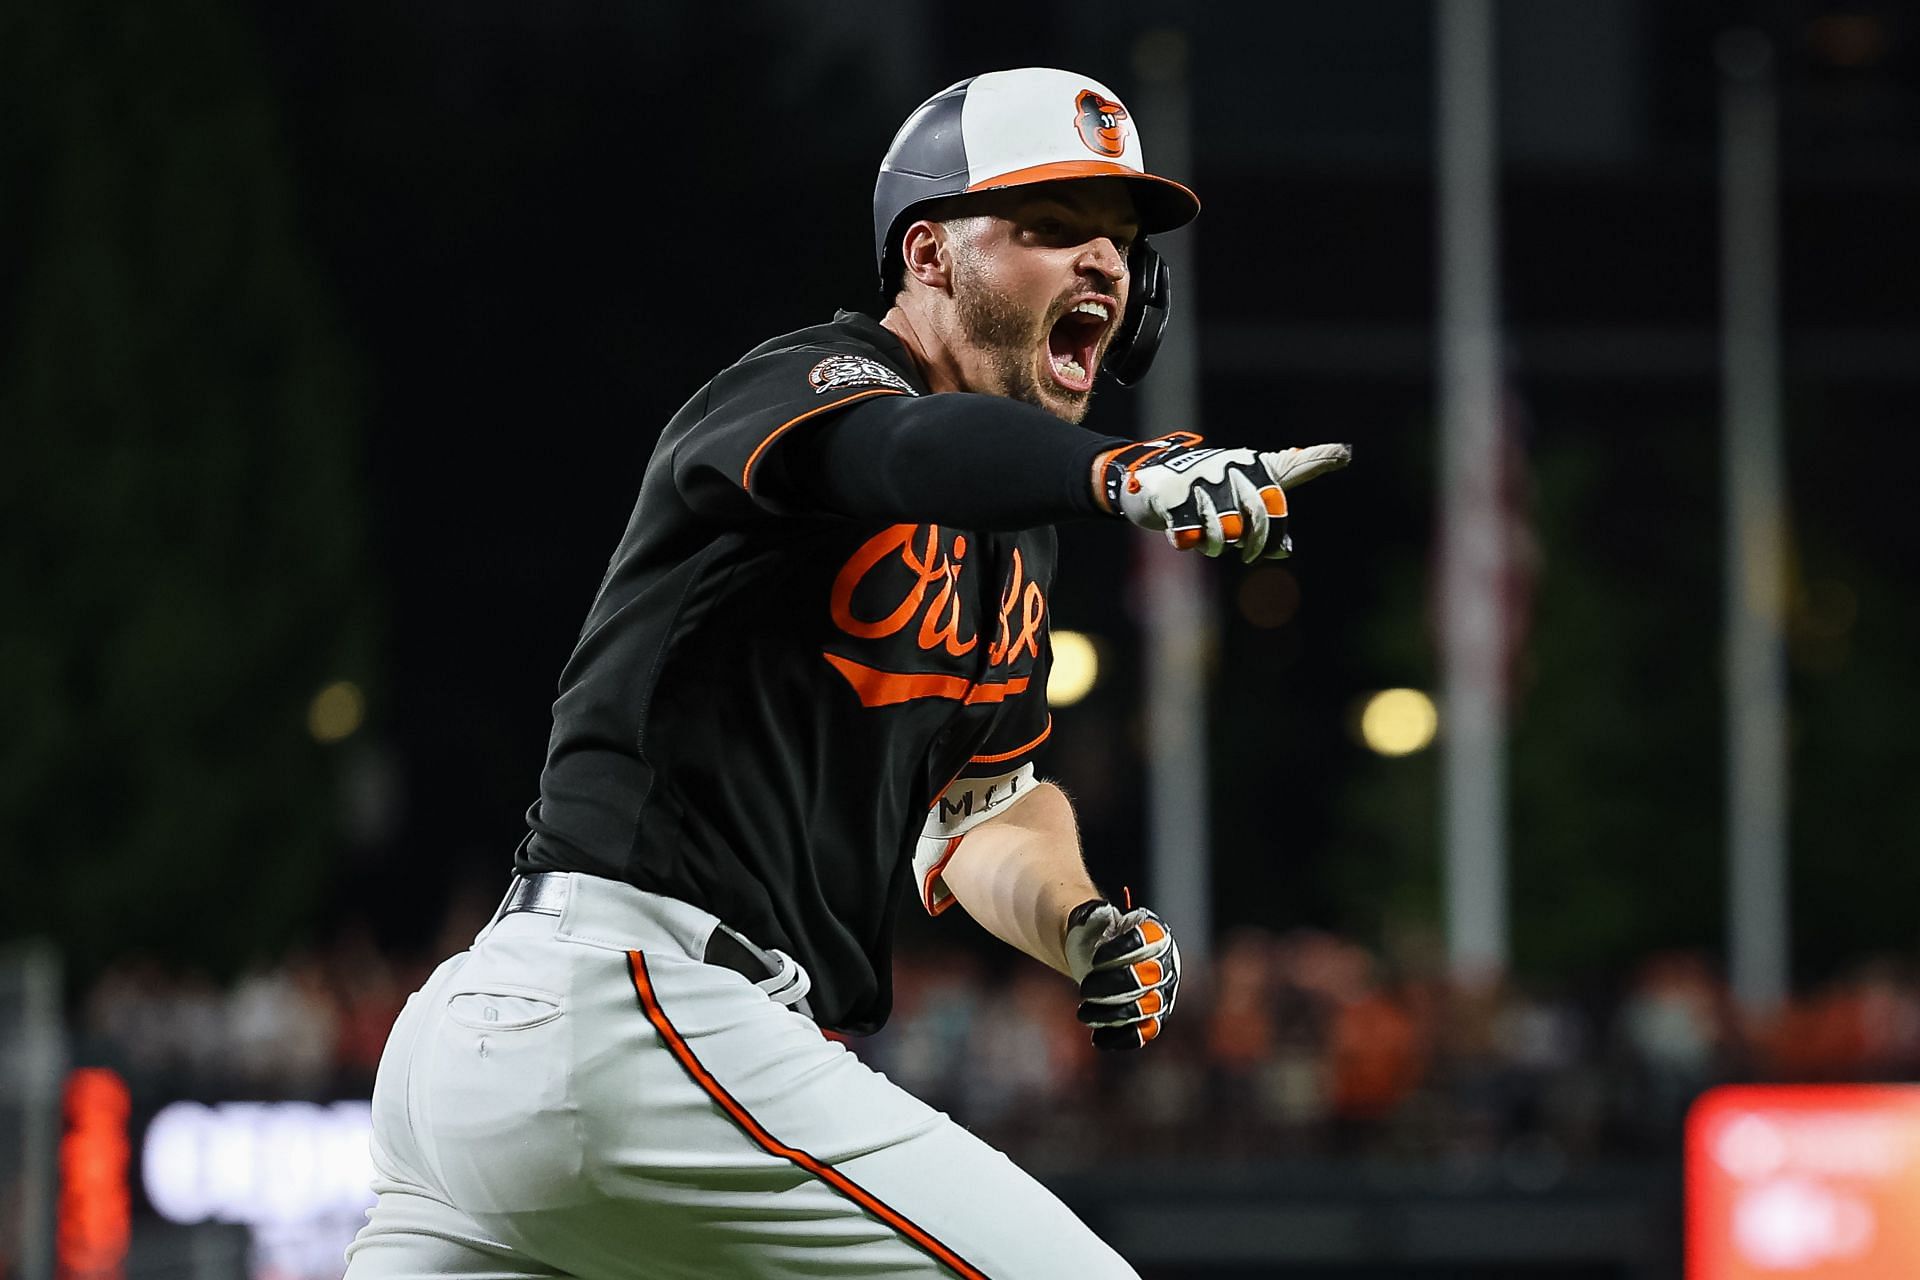 Trey Mancini has been traded from the Baltimore Orioles.